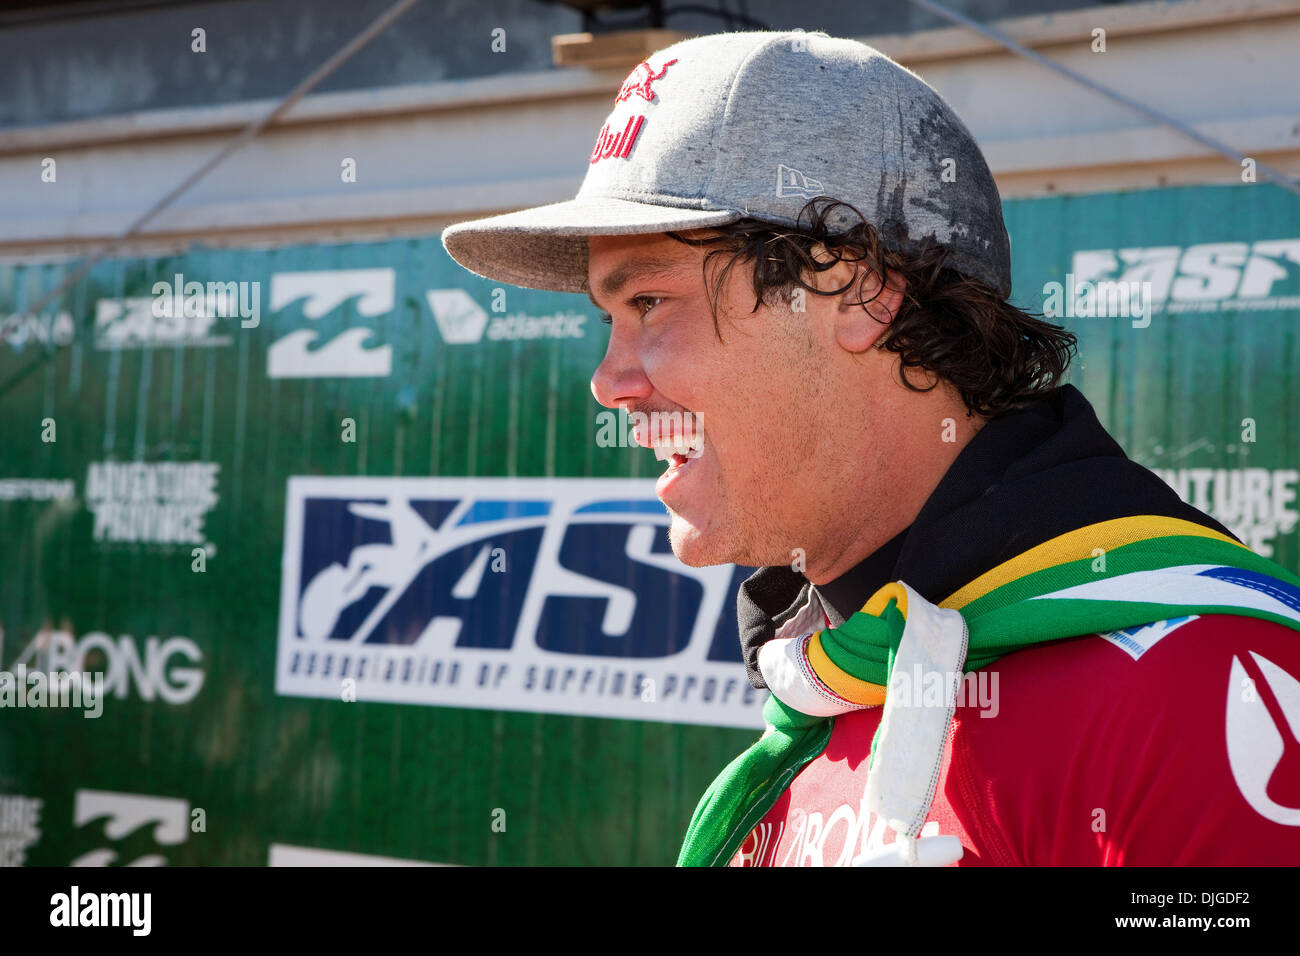 Jul 19, 2010 - Jeffreys Bay, South Africa - South African JORDY SMITH clams his maiden victory on the WT, making him the first South African to win a World Tour event since Shaun Tomson, the first South African to make a final in Jeffreys Bay, and the first South African to lead the ratings since the inception of the new World Tour. And all on Mandela's birthday. Jordy is now ranke Stock Photo